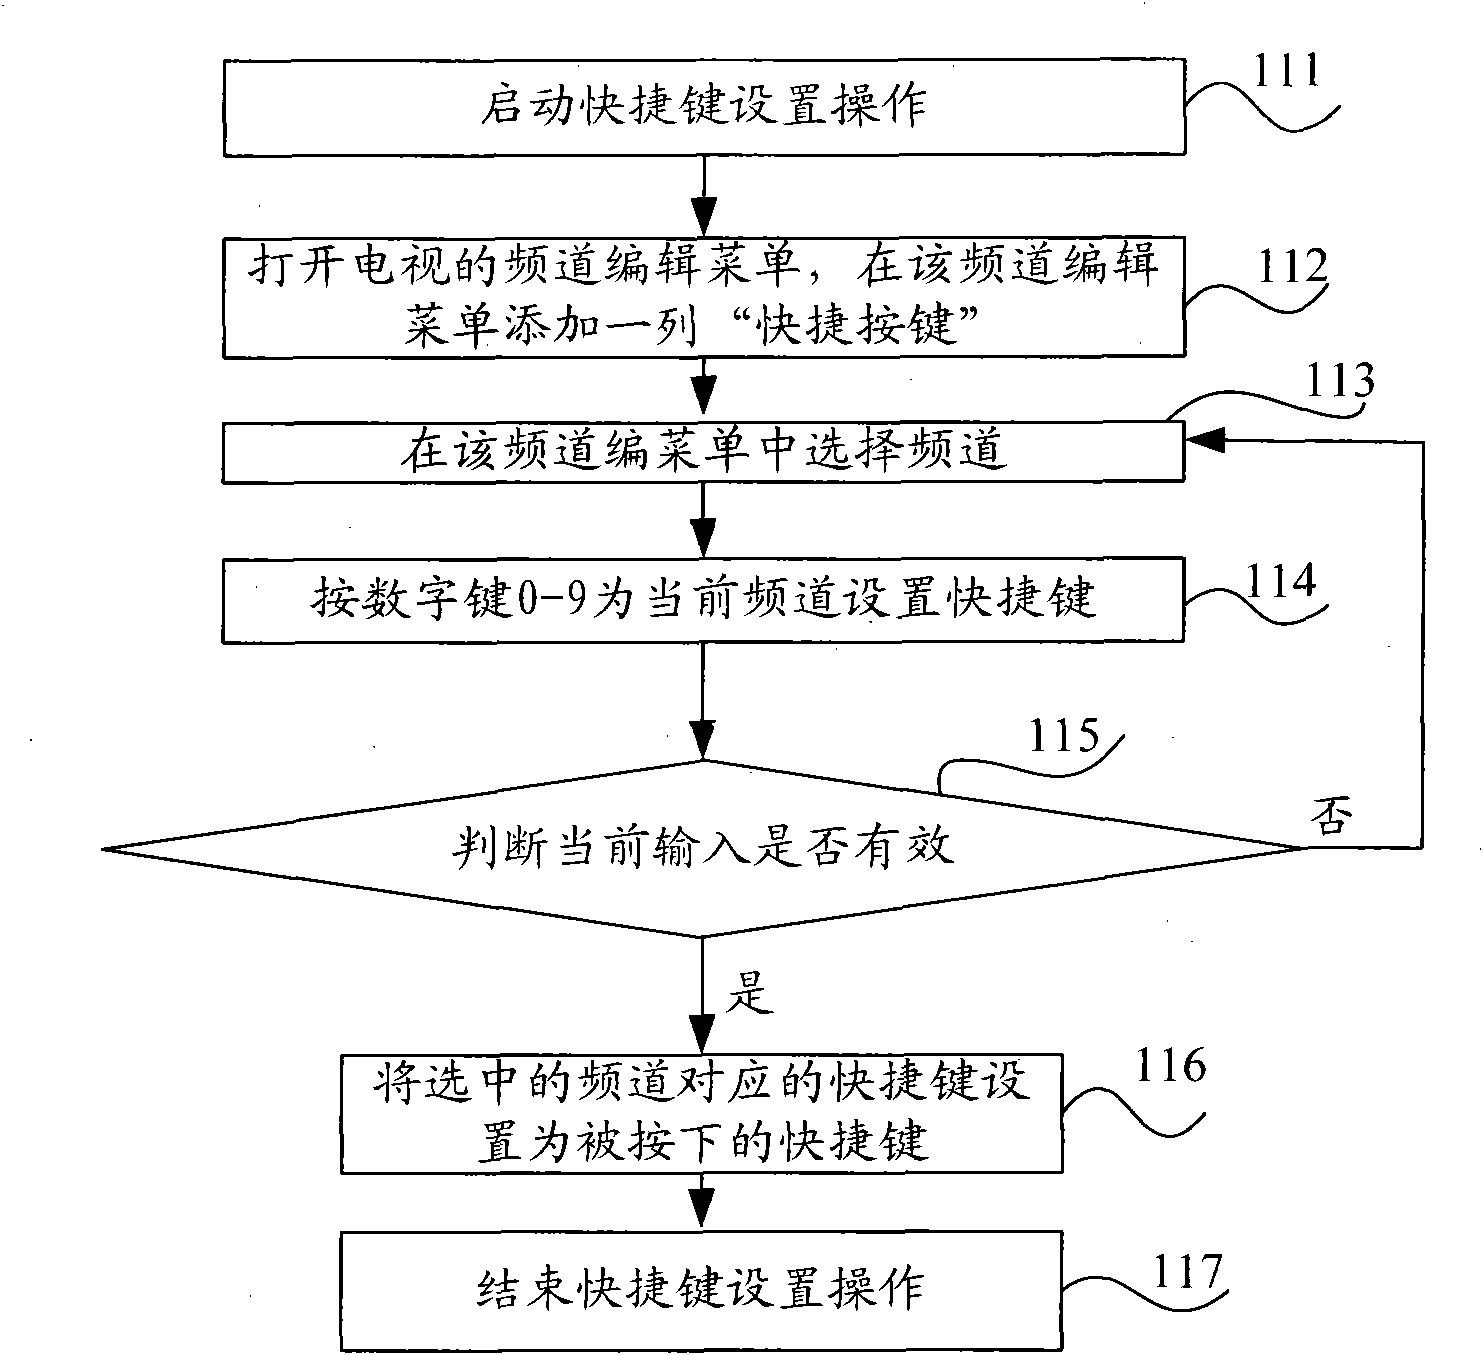 Method and system for setting shortcut key for remote control of video equipment